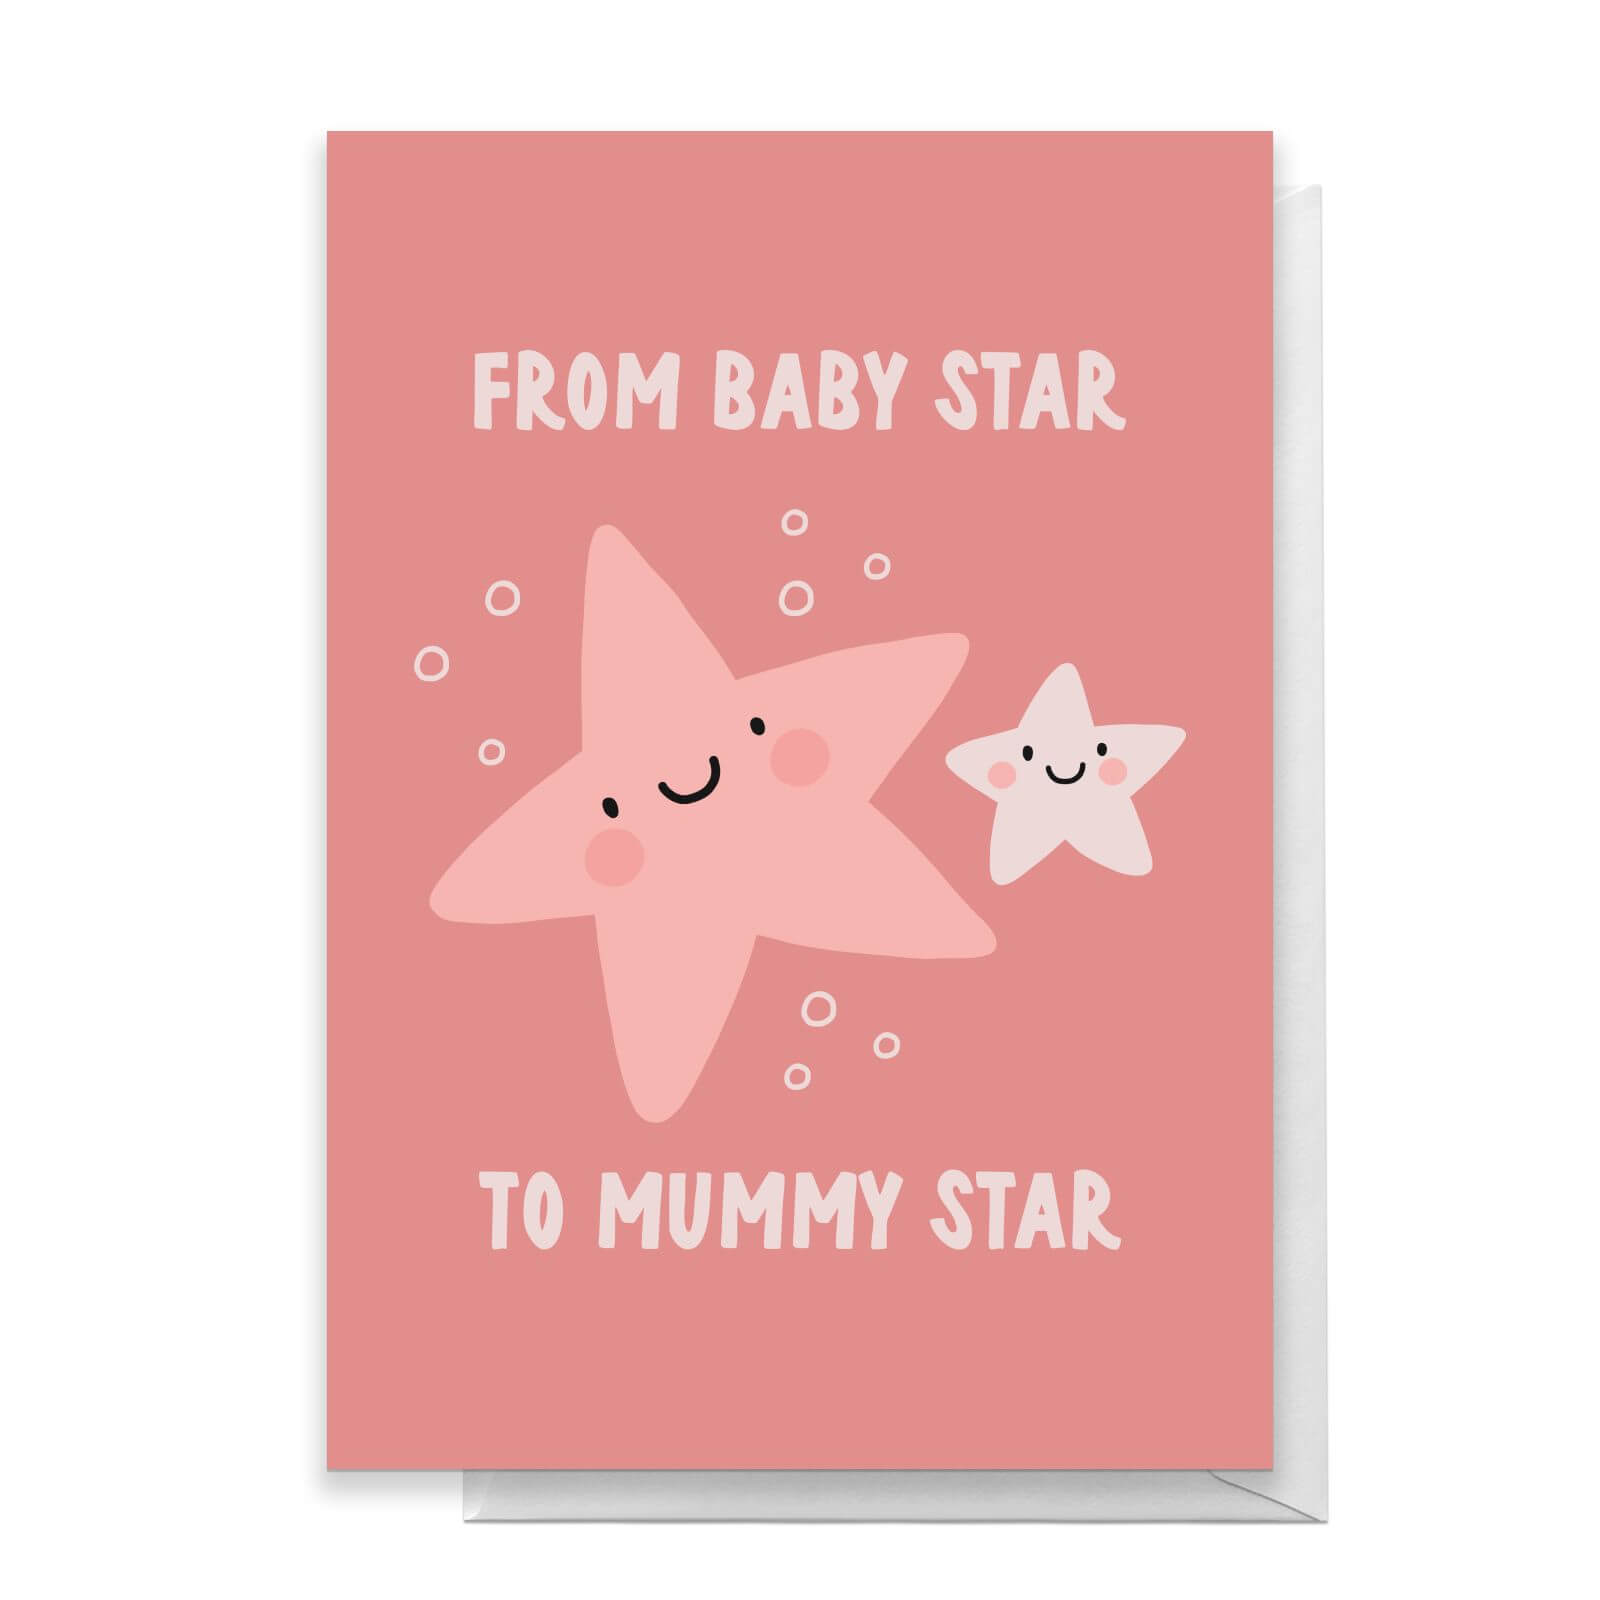 From Baby Star To Mummy Star Greetings Card - Standard Card